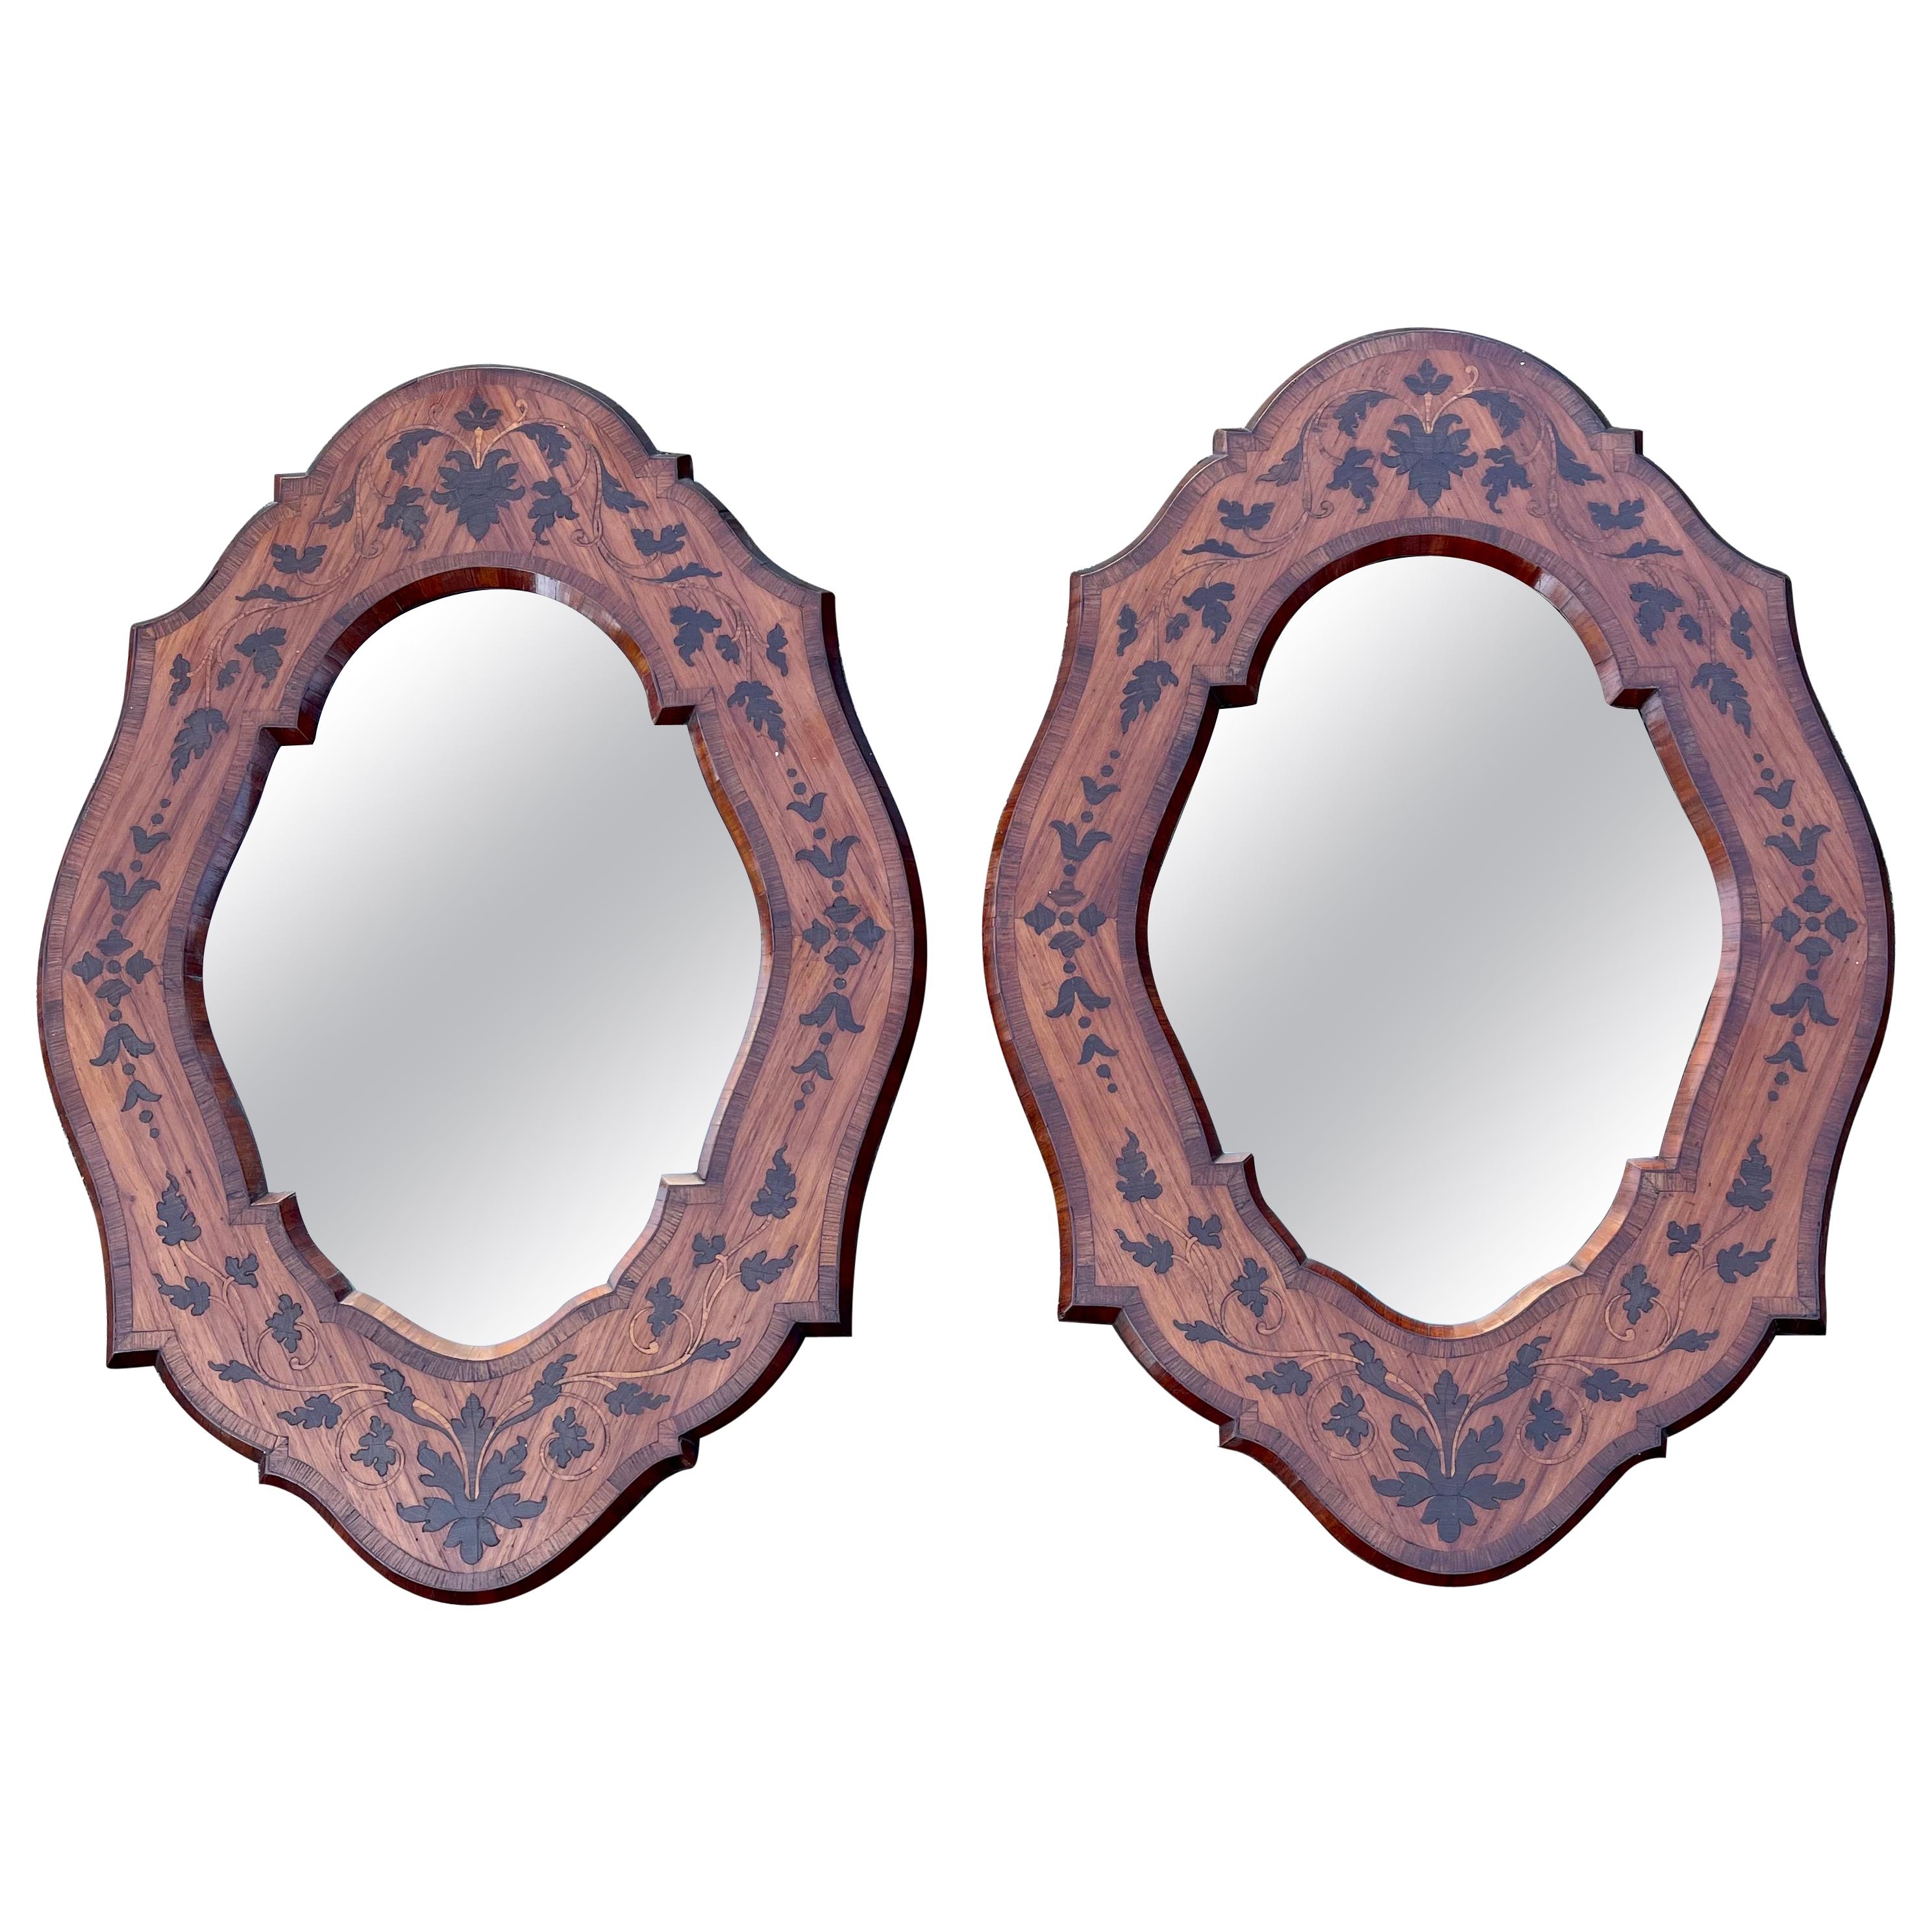 Unique Pair of Italian Wall Mirrors Kingwood Marquetry Inlay Frames, circa 1870